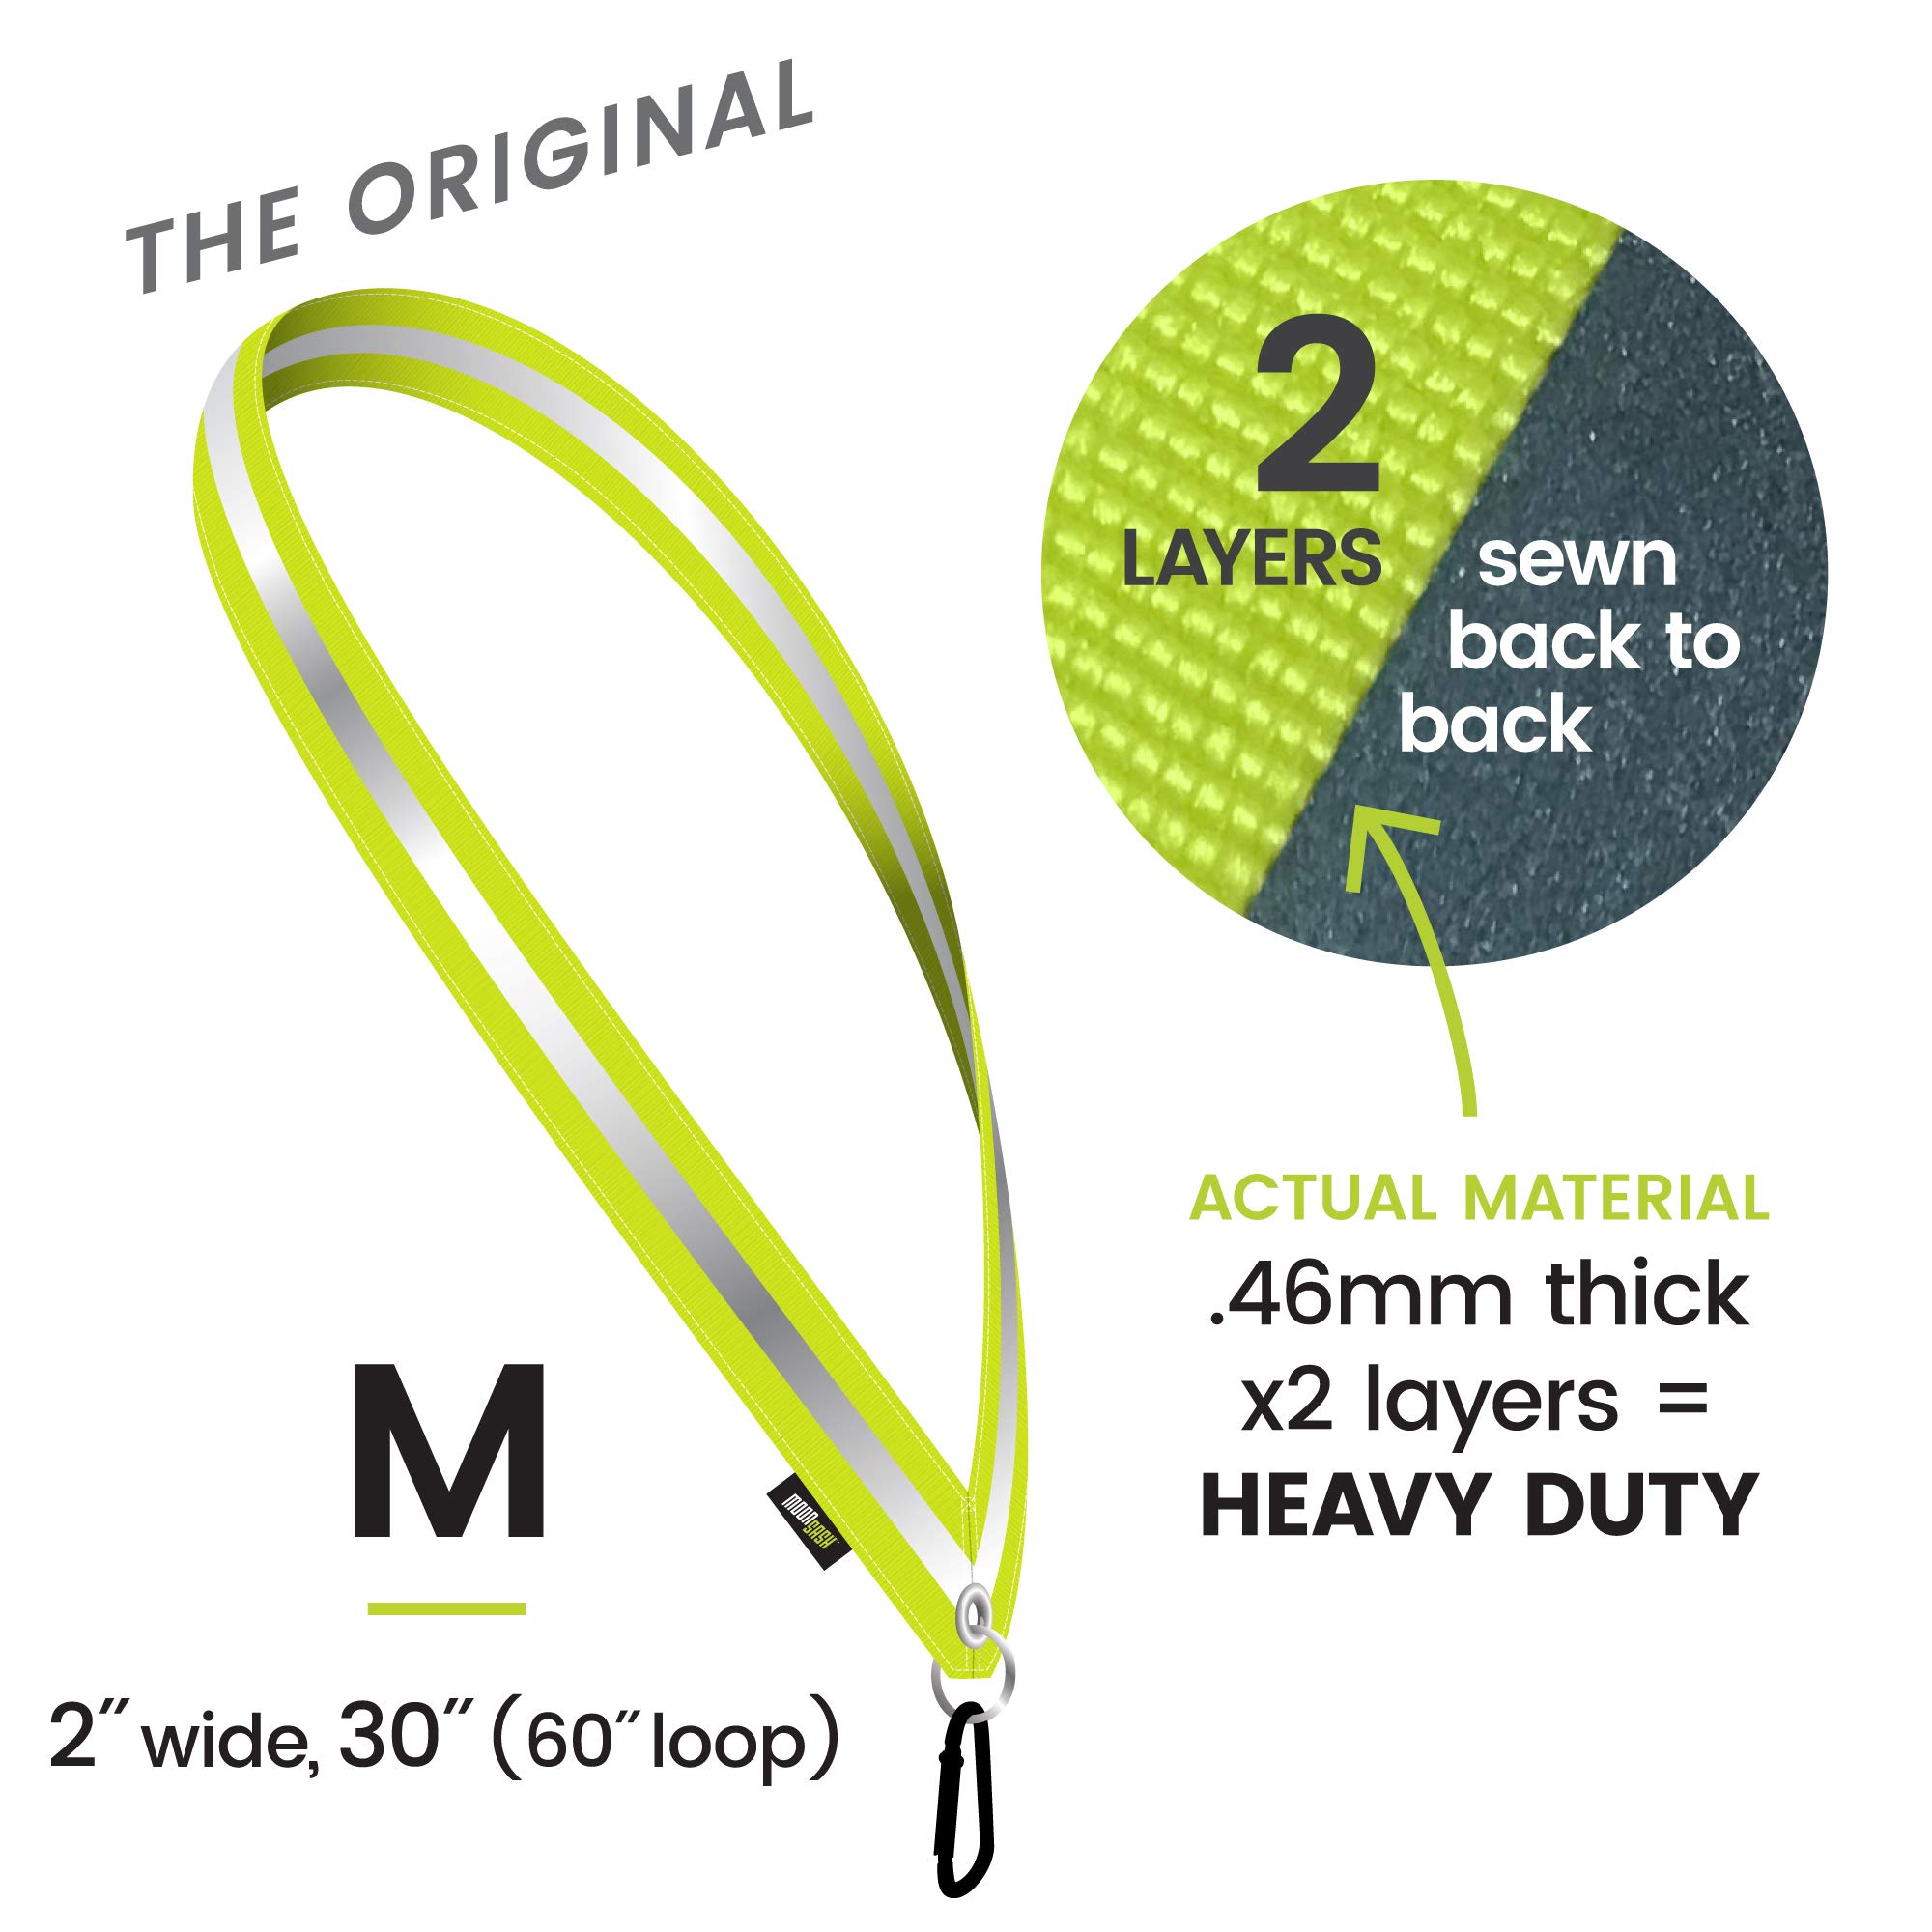 MOONSASH  Made in USA  Patented  The Original + Best Reflective Sash  No Batteries, Fitted Sizes, Reversible, Stylish & Durable Reflective Gear for Walking at Night